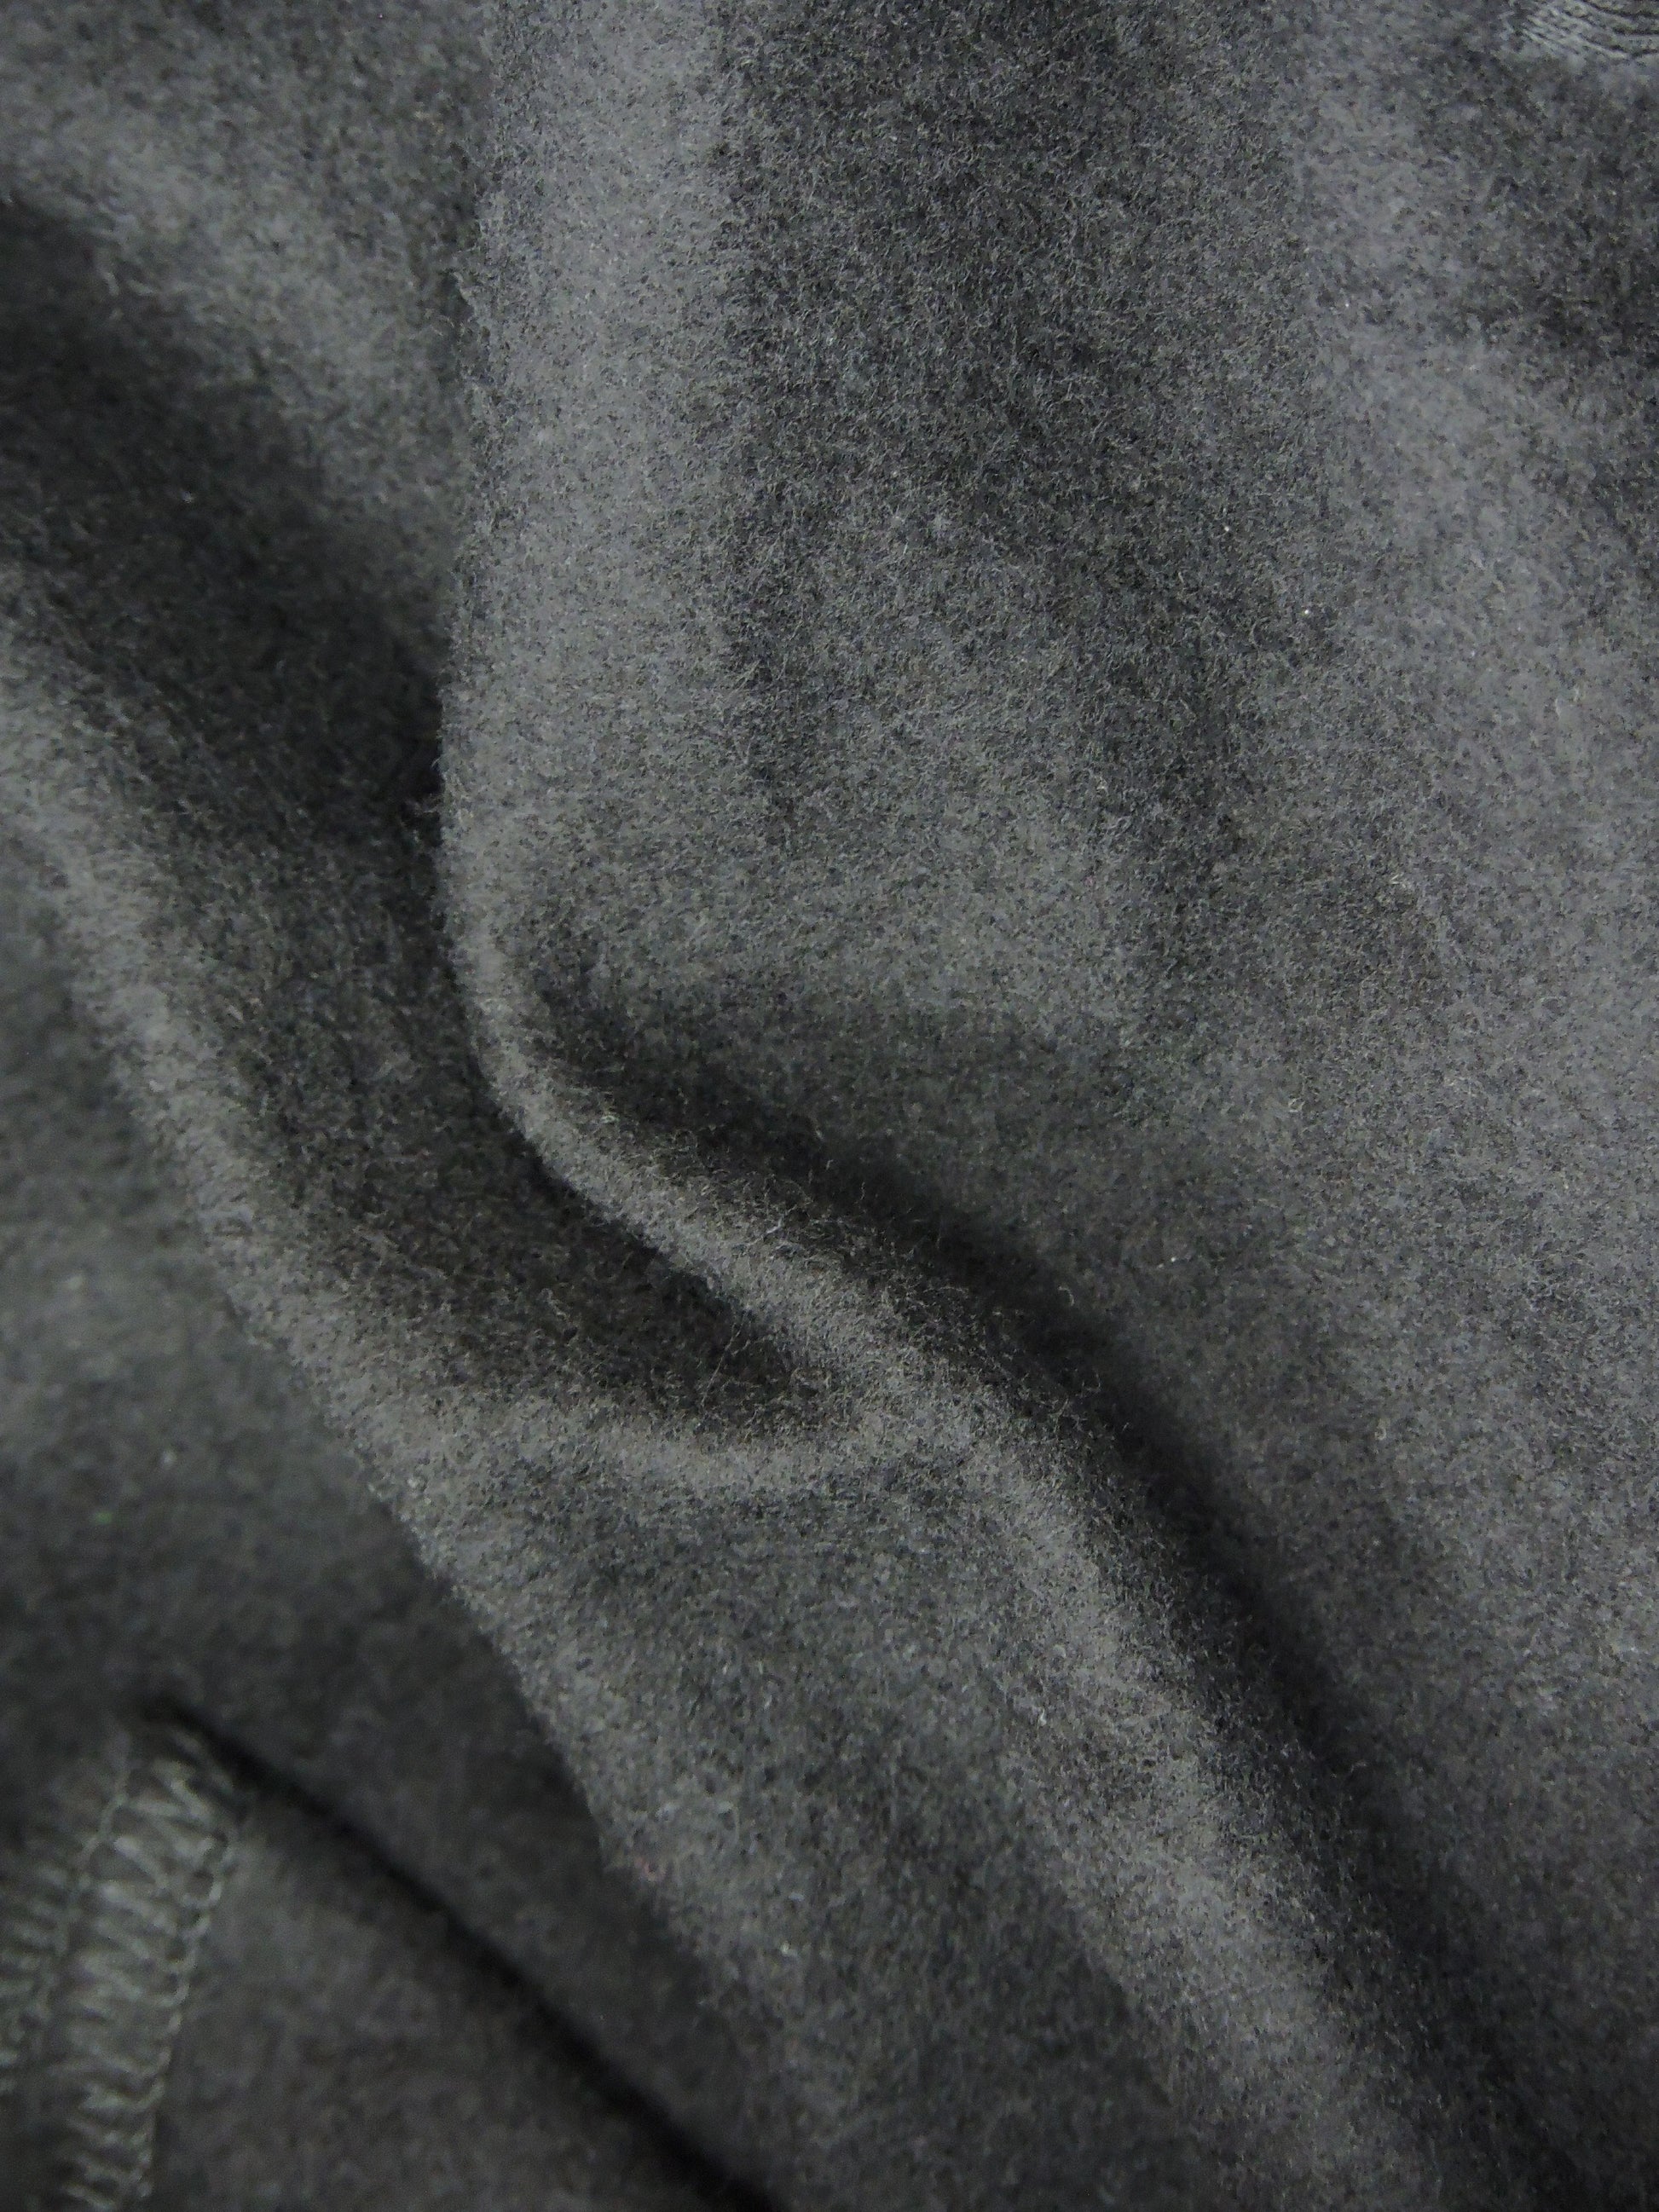 Detailed close up of high quality fleece material